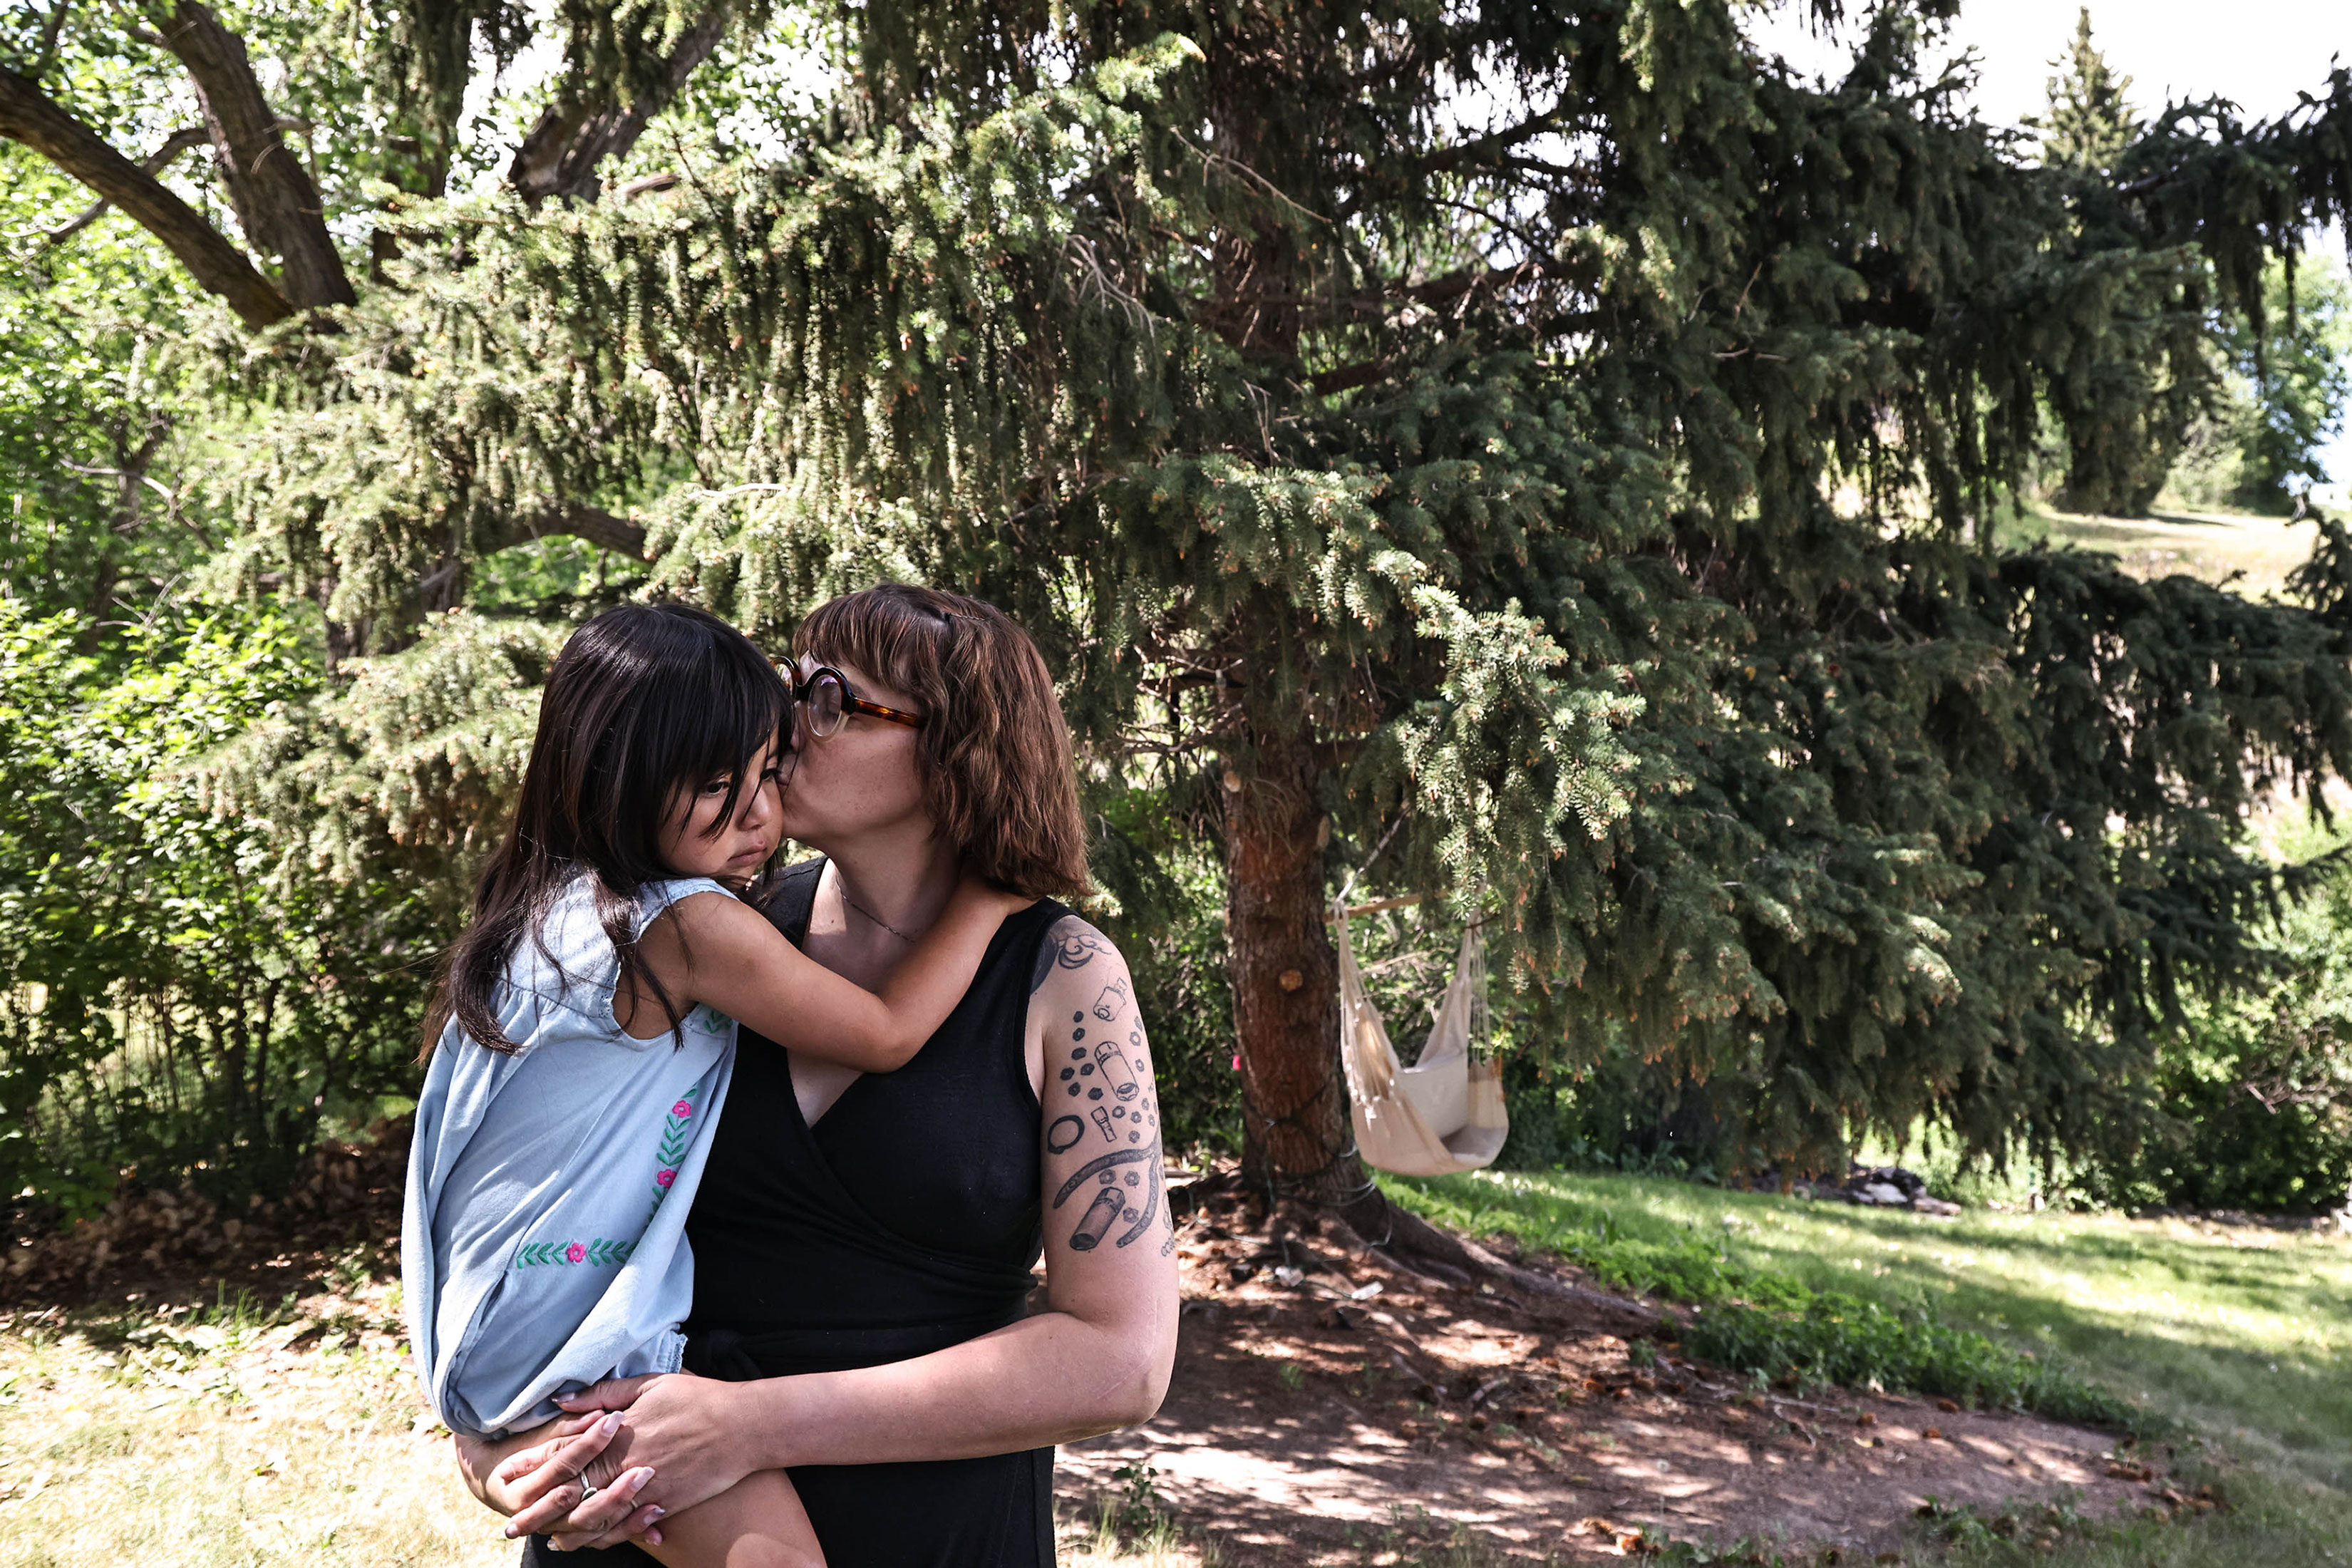 A woman holding a young child and kissing her on the cheek stands outside in front of a coniferous tree.